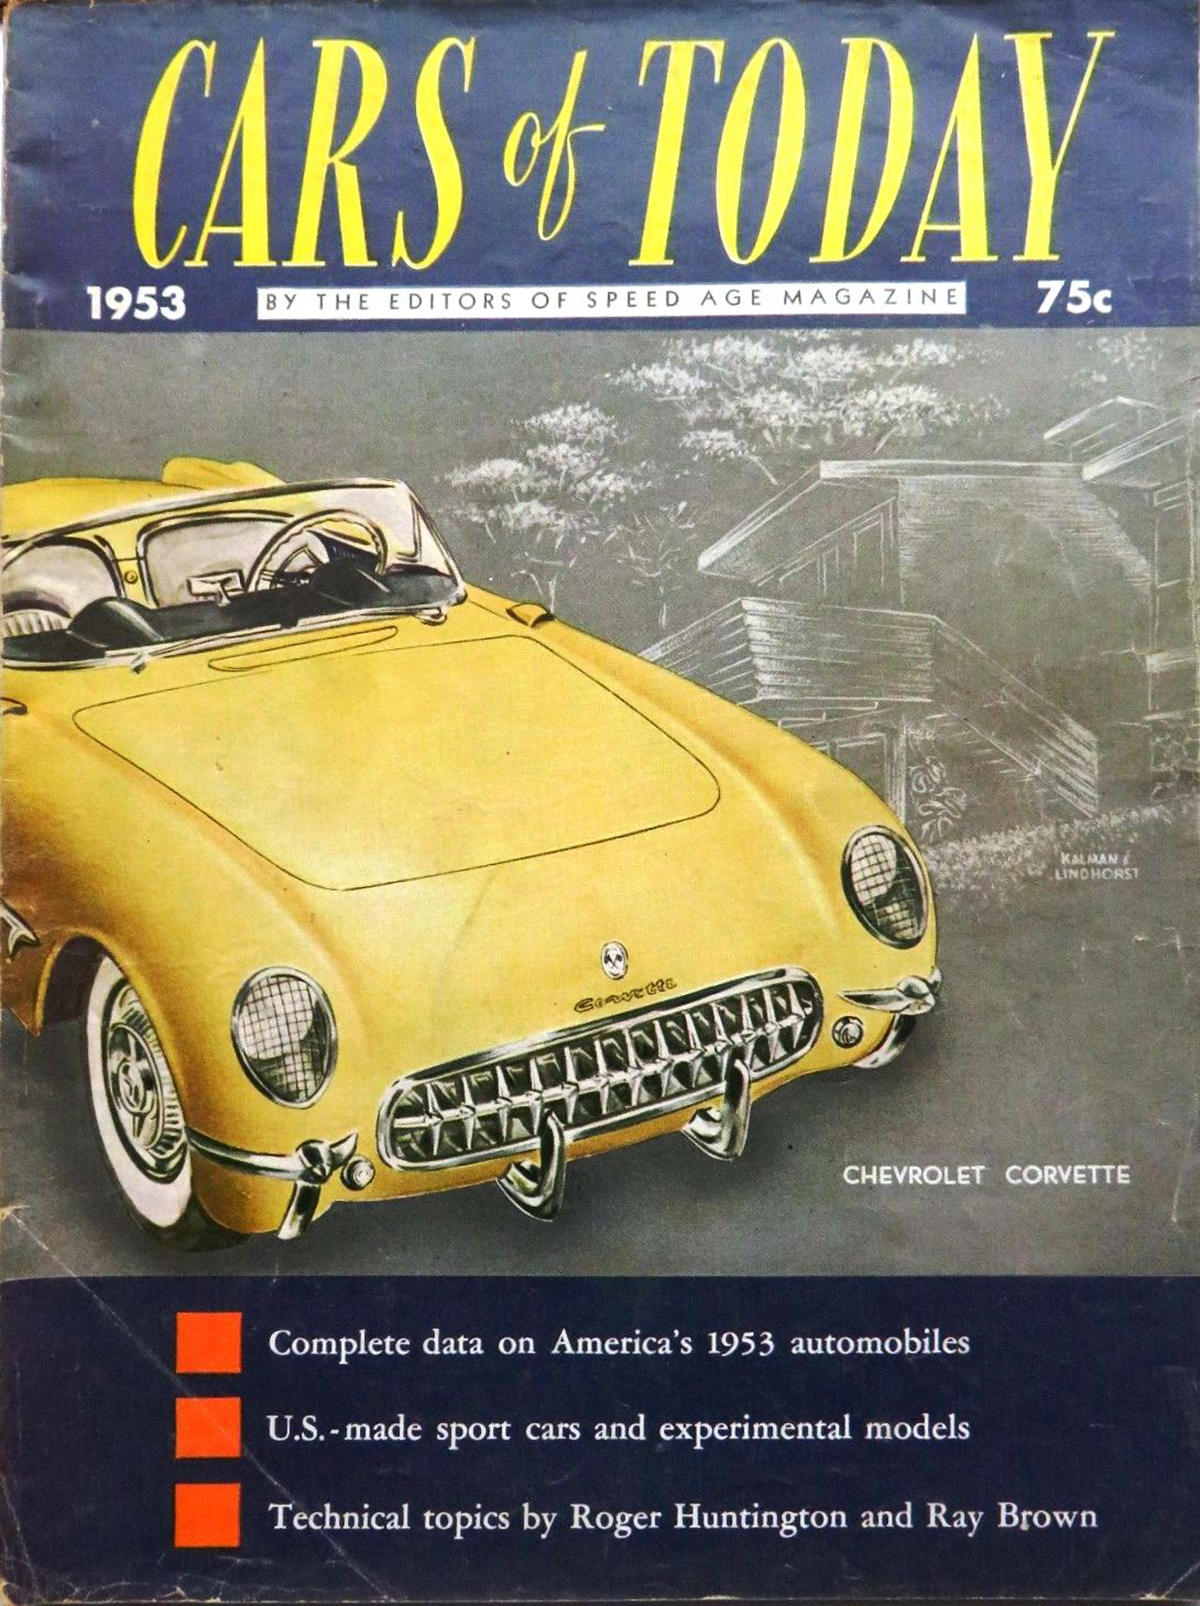 Cars of Today Cover